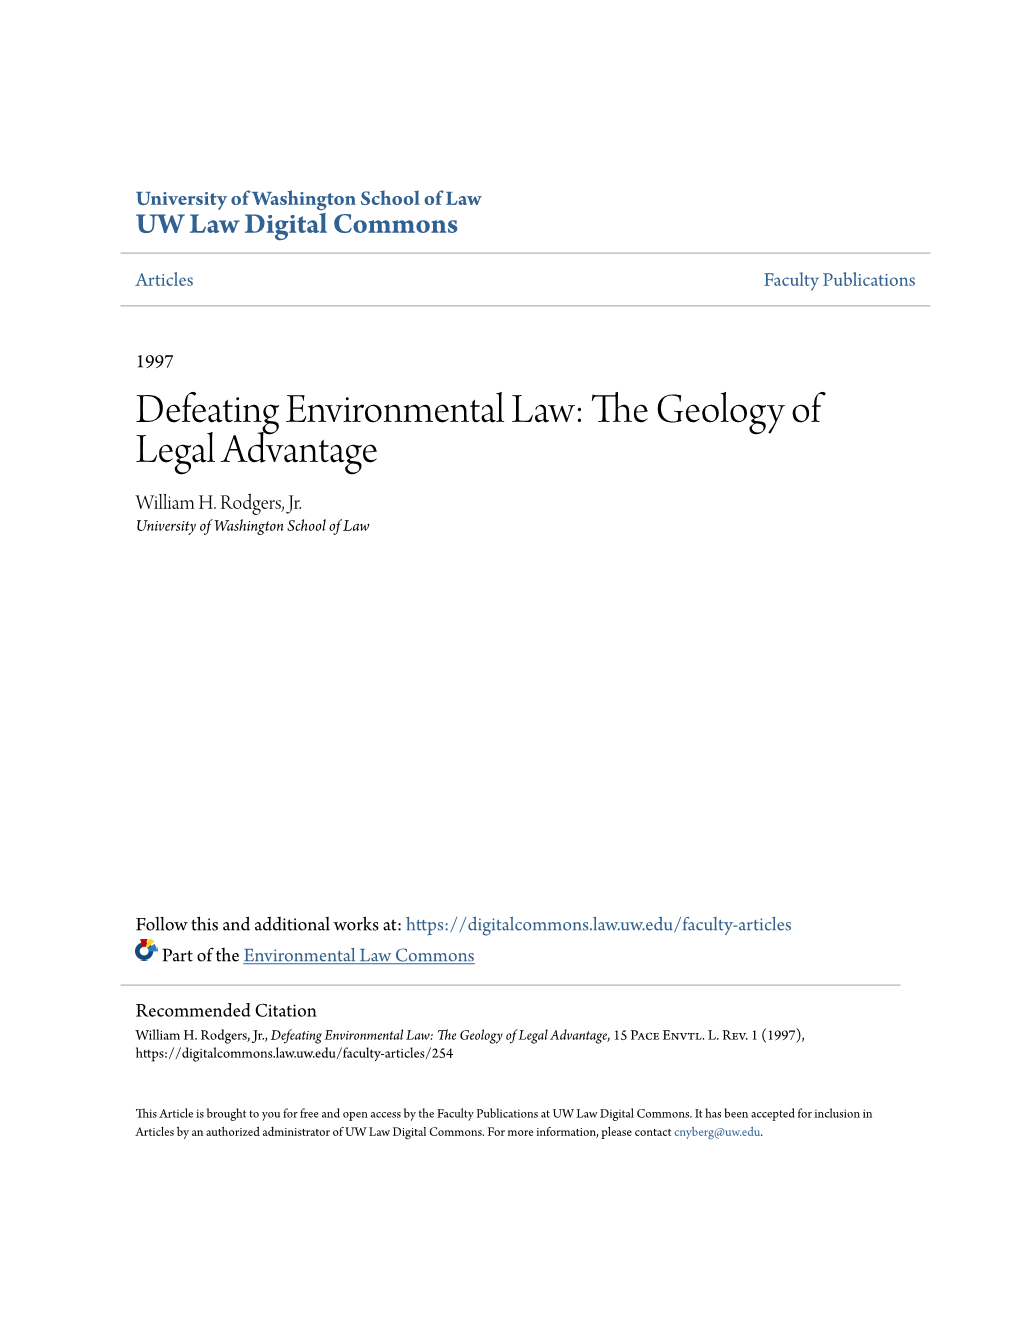 Defeating Environmental Law: the Geology of Legal Advantage William H